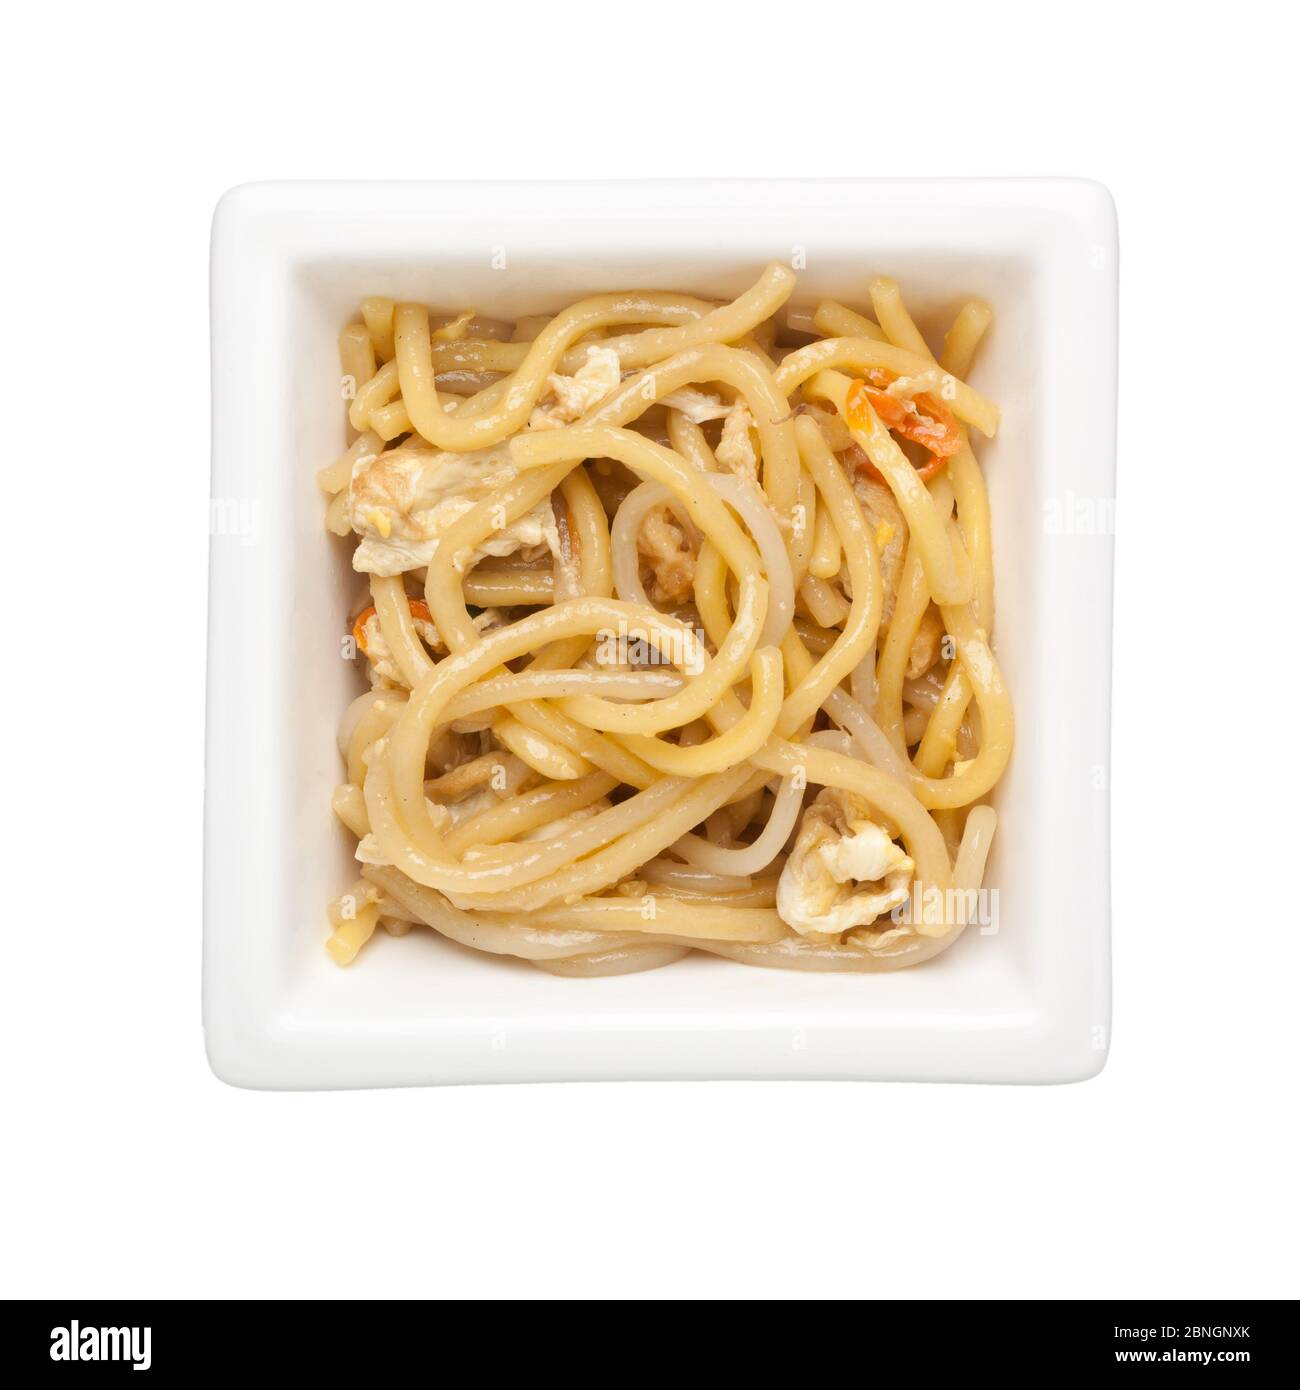 Asian cuisine - Stir fried noodles in a square bowl isolated on white background Stock Photo